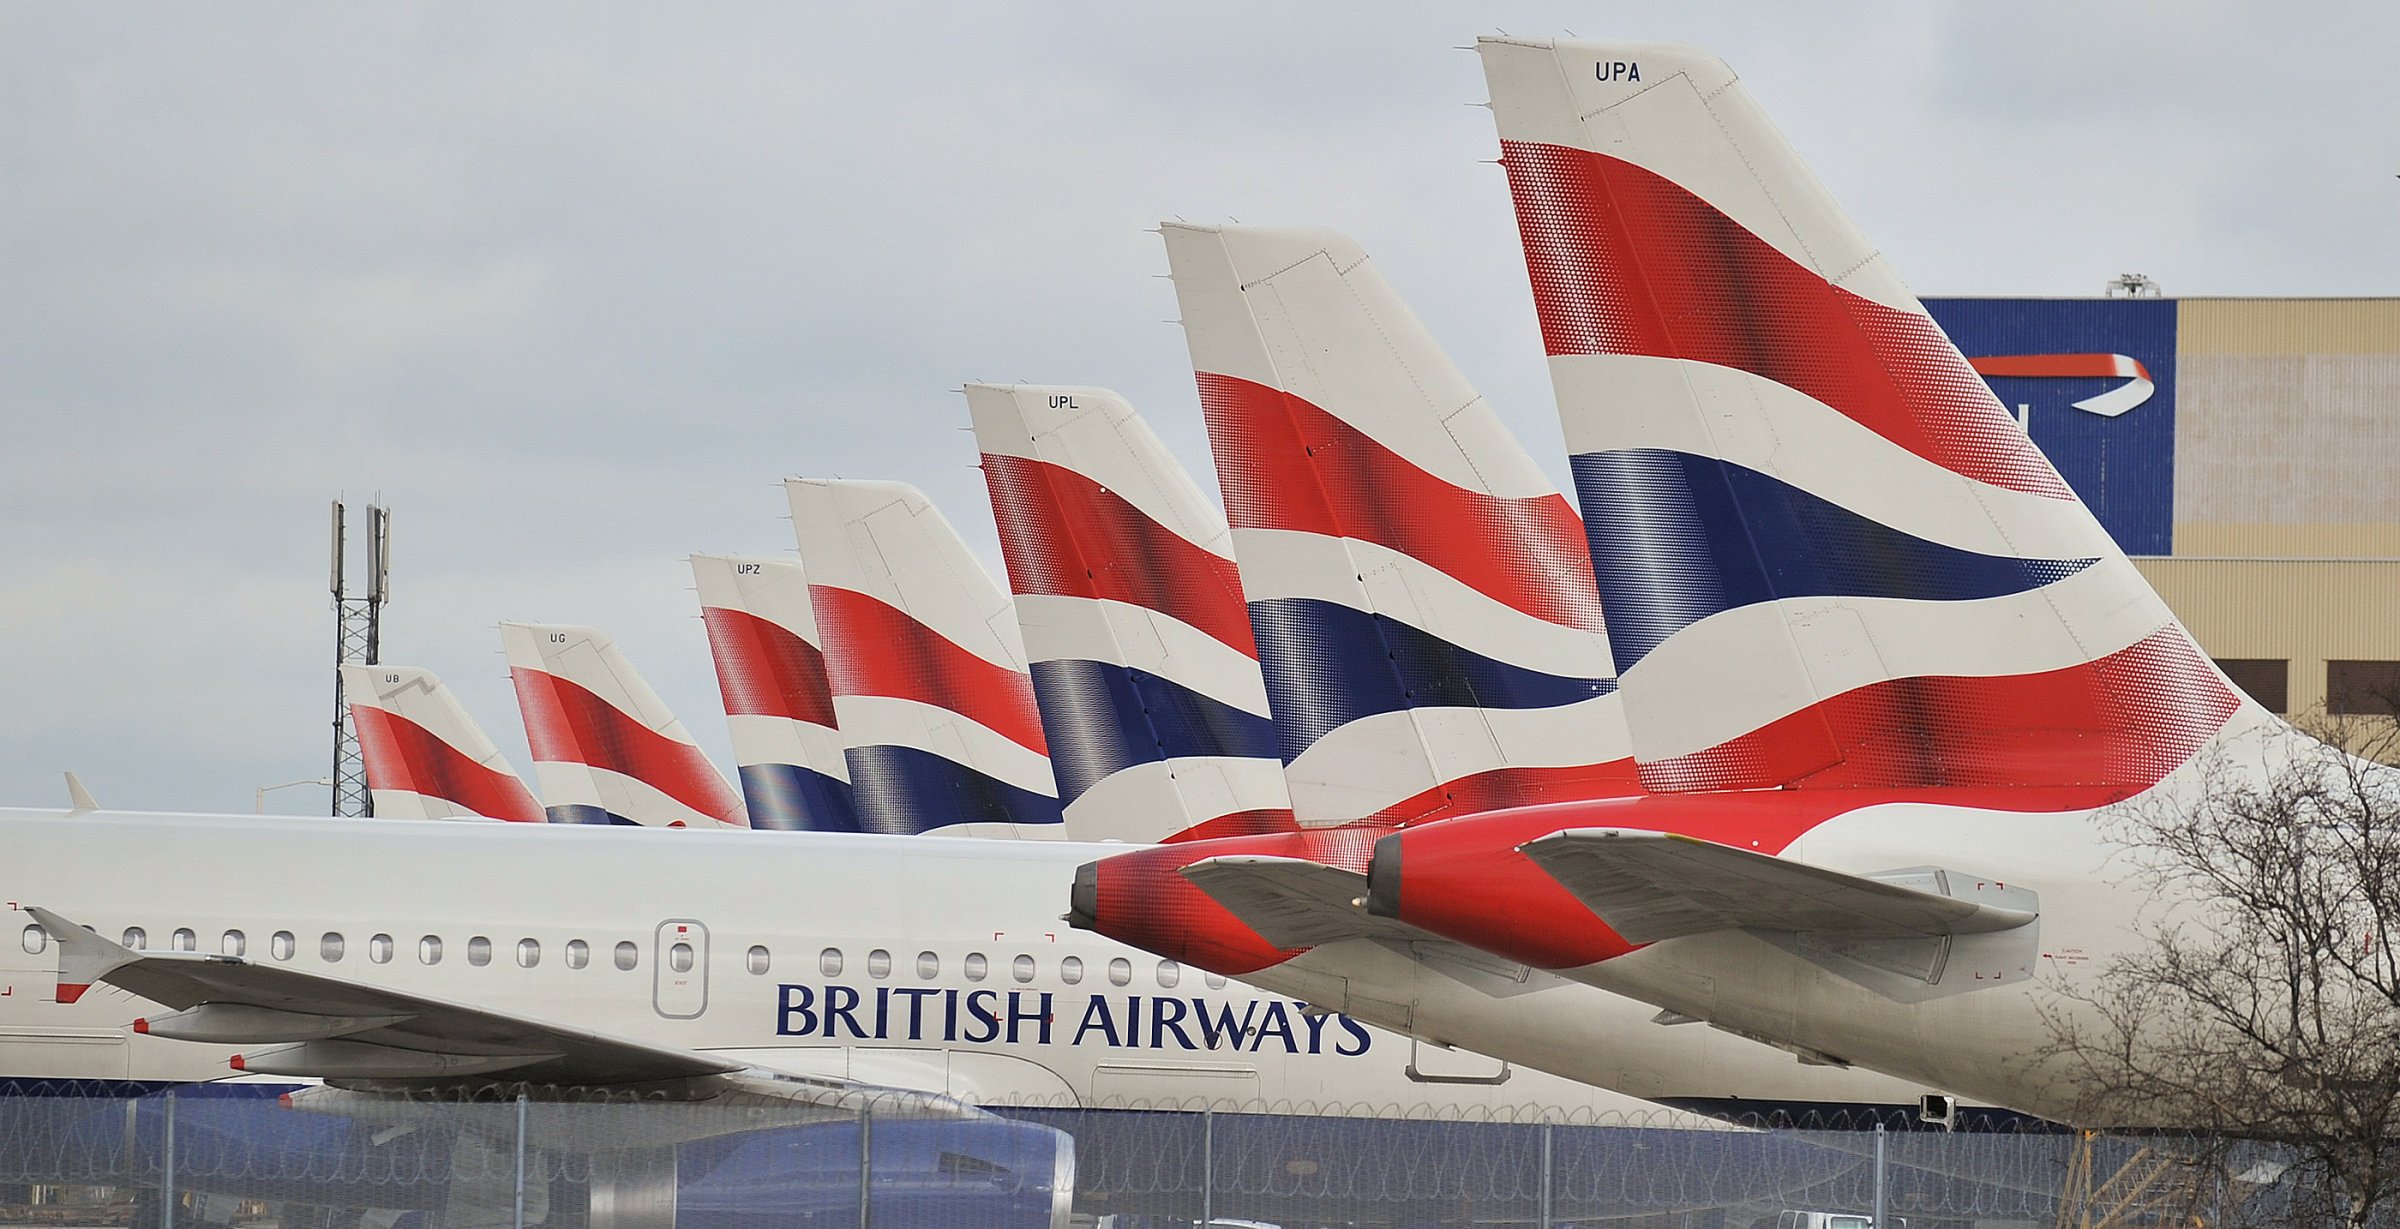 British Airways planes are grounded at Heathrow Airport on March 28, 2010.